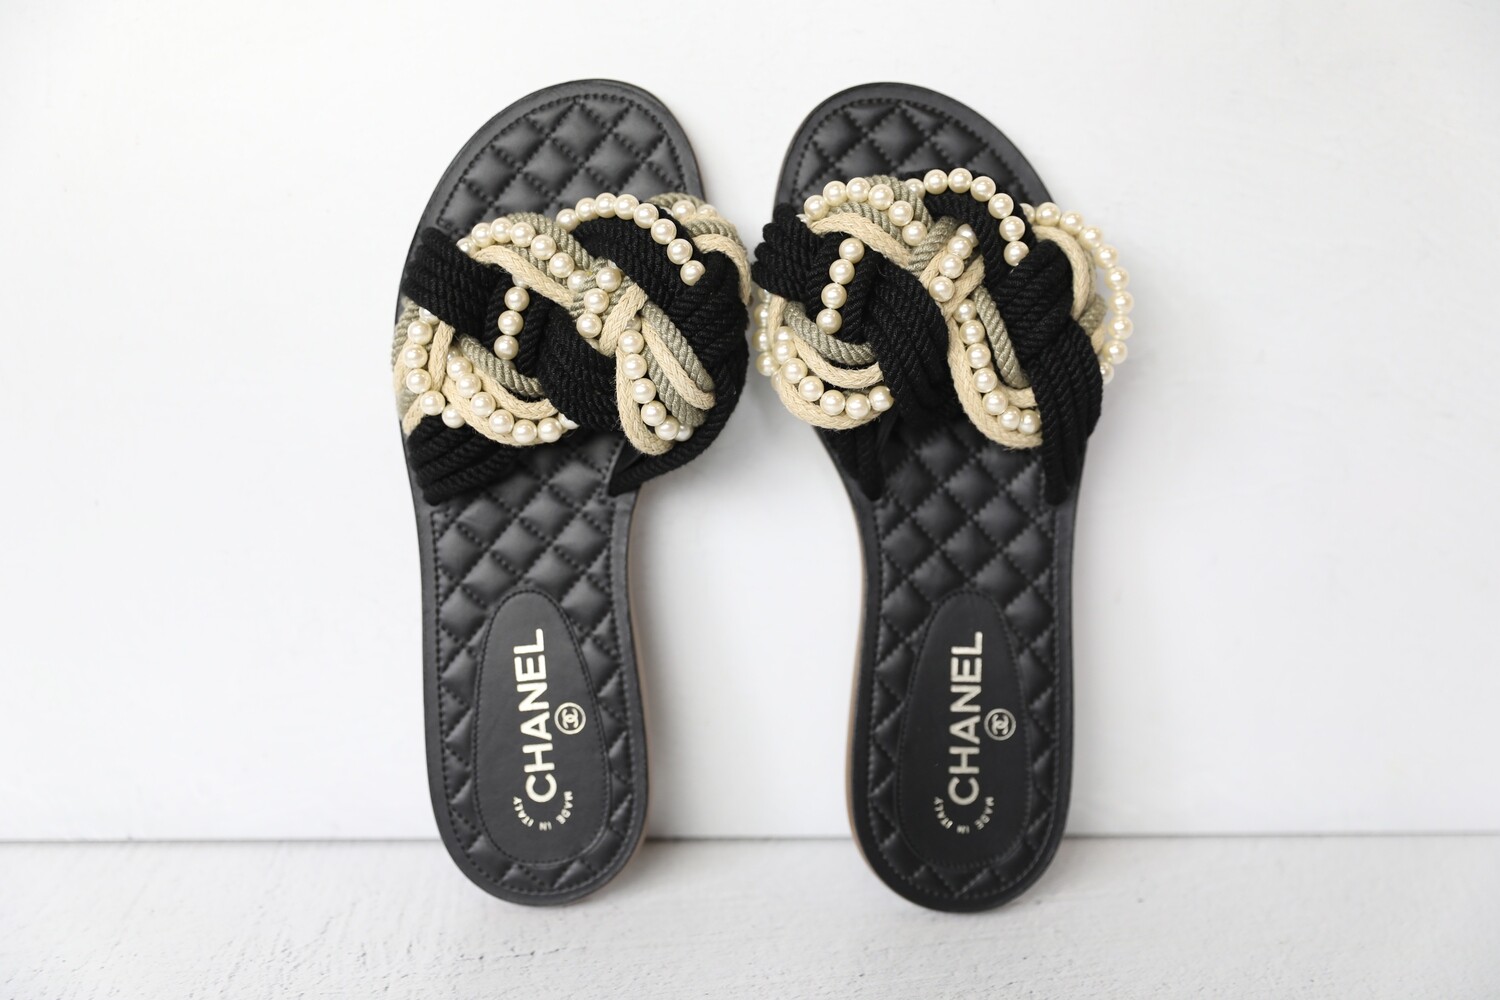 Chanel Rope and Pearl Slide Sandals, Black and White, Size 41, New in  Dustbag WA001